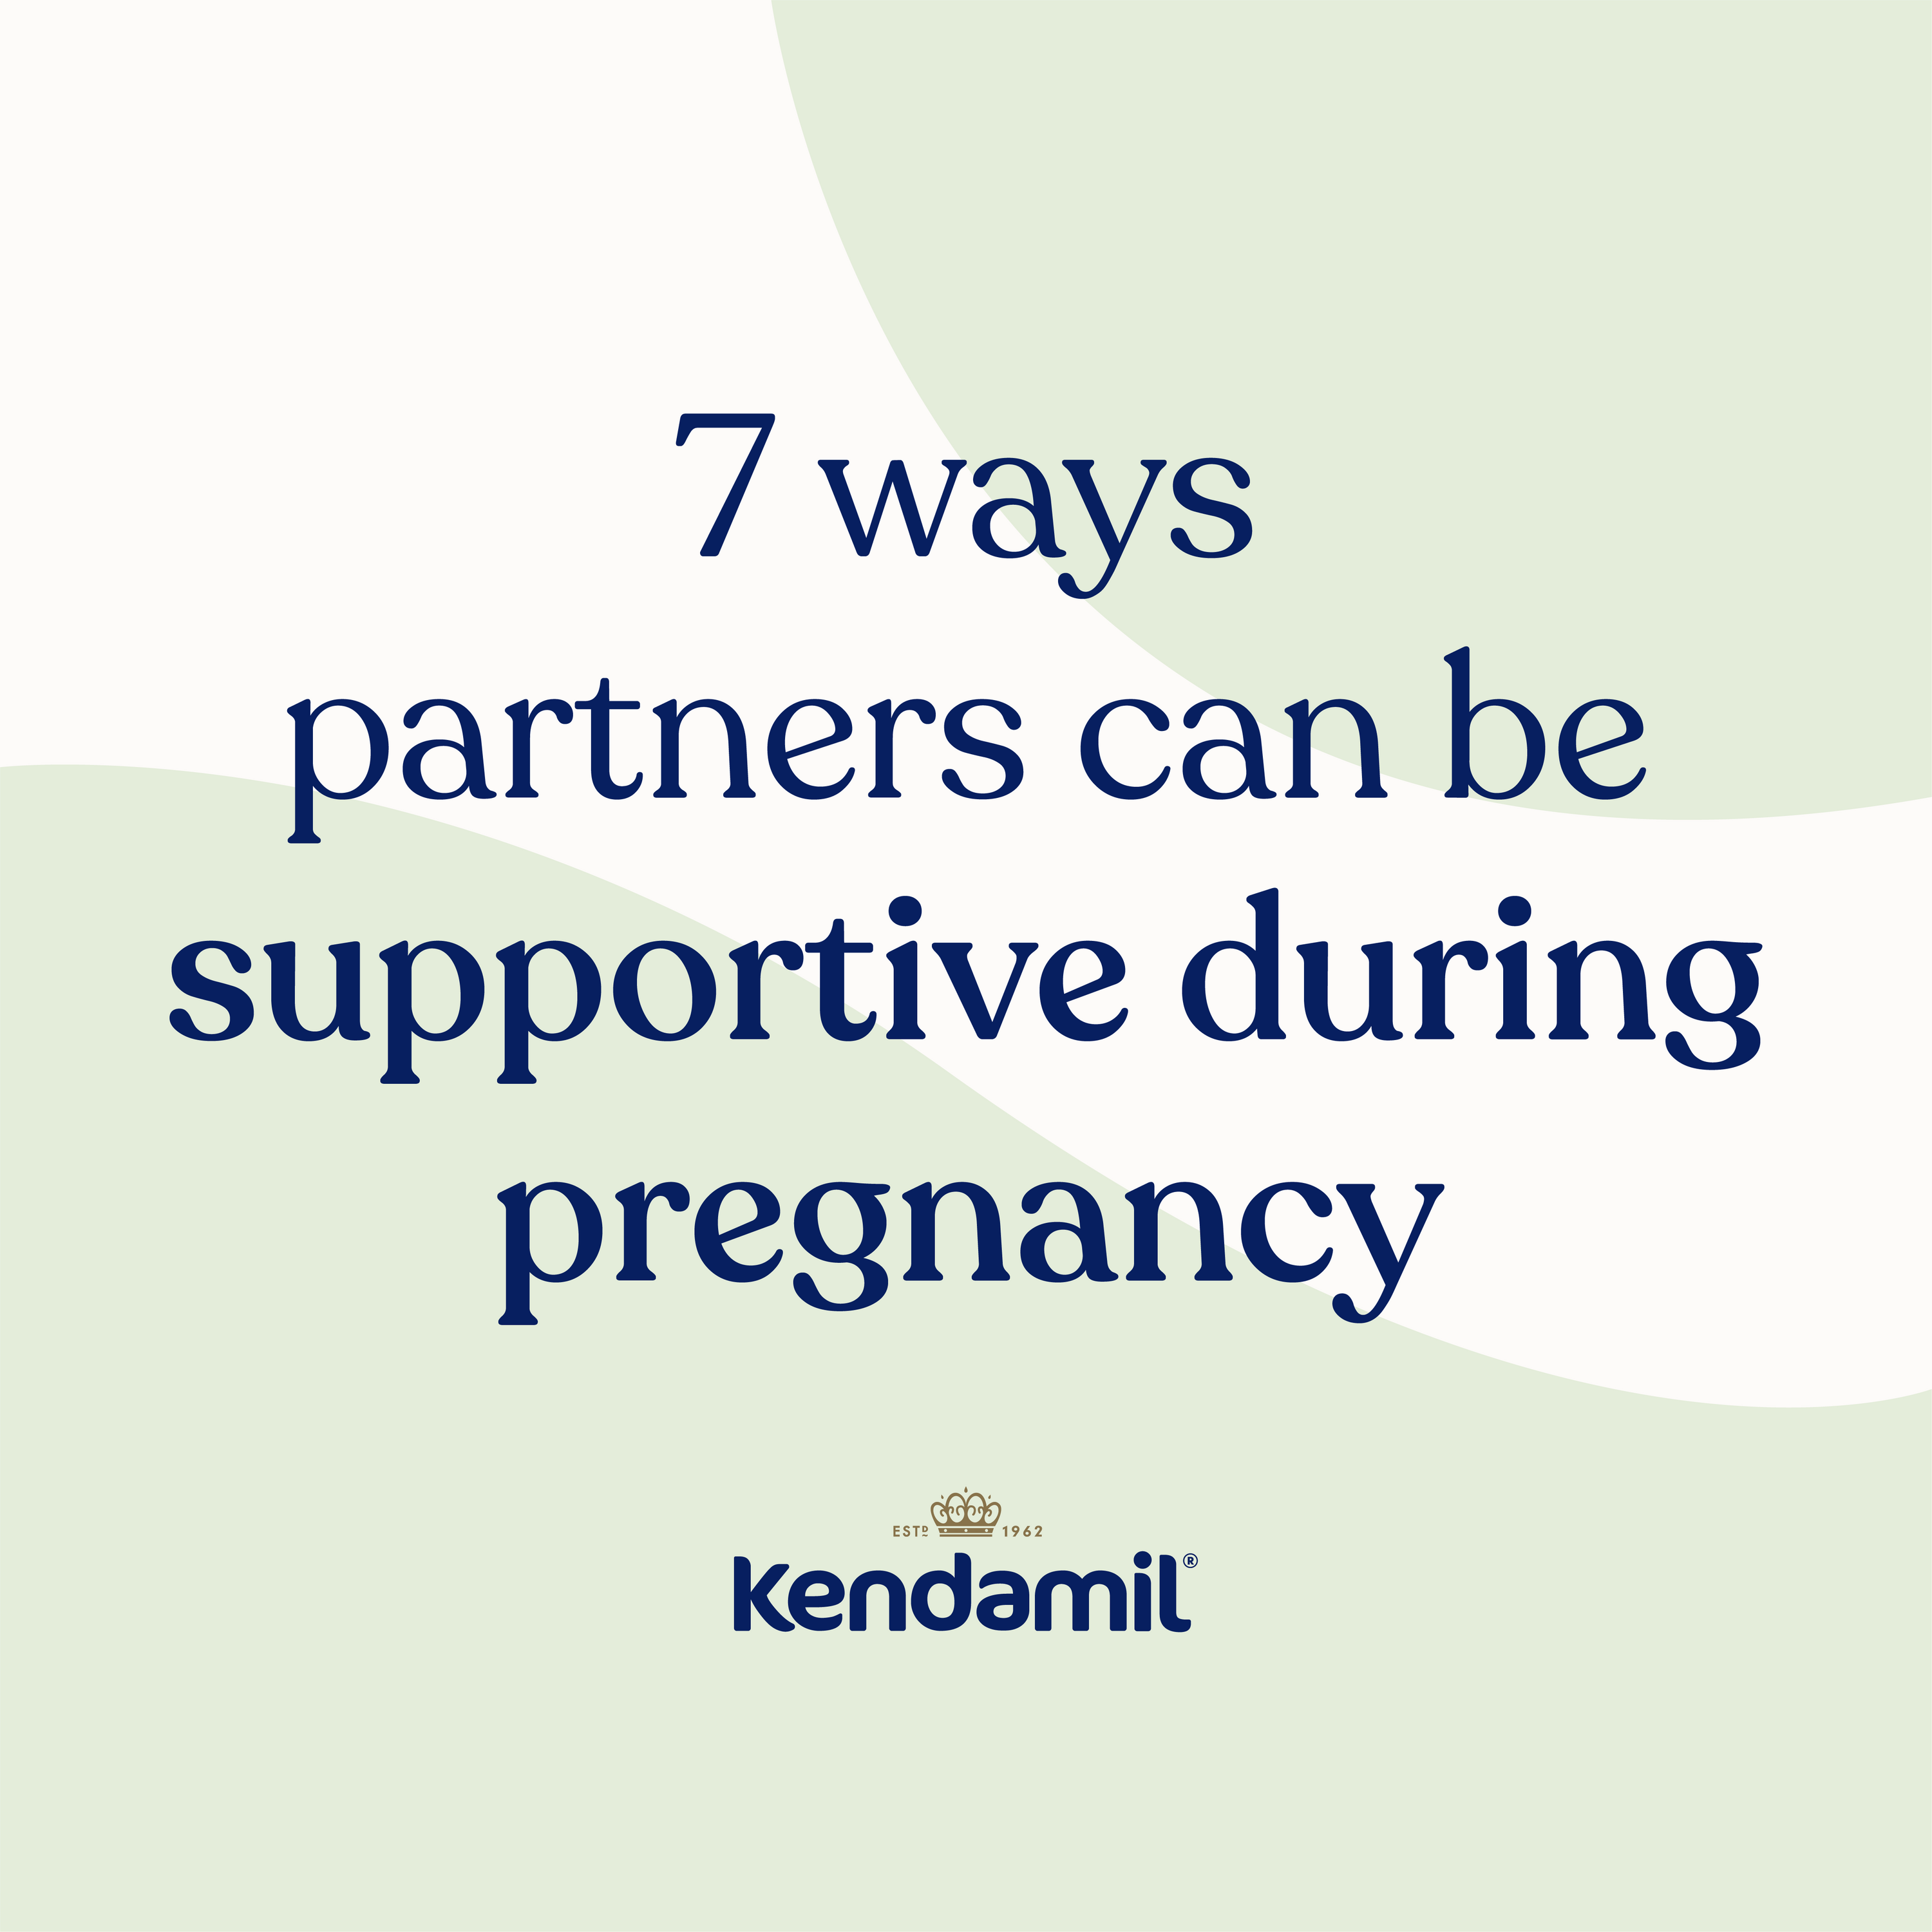 7 ways partners can be supportive during pregnancy